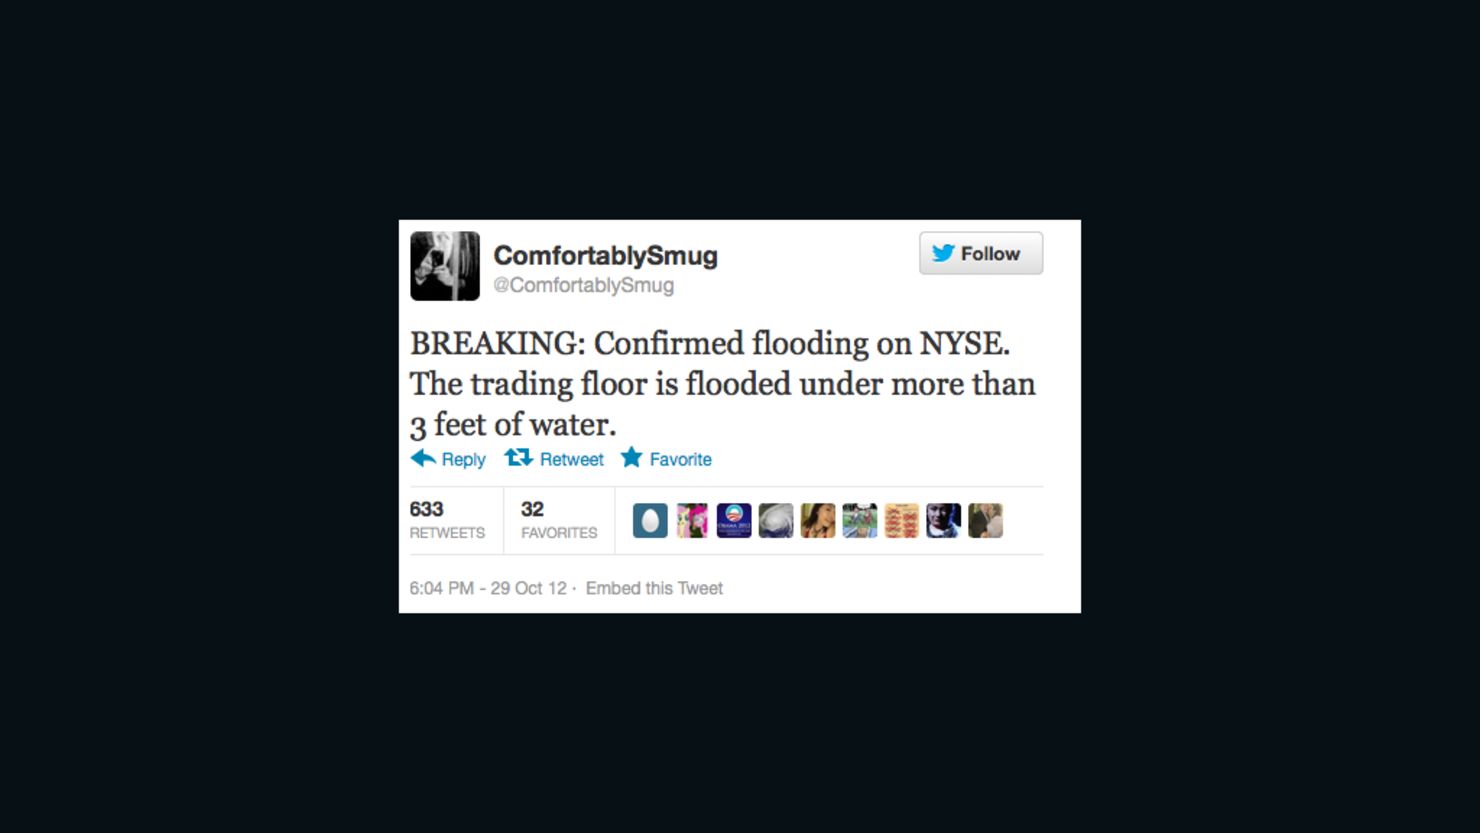 This tweet was one of several false reports posted by Twitter user @ComfortablySmug as Sandy pummeled New York.